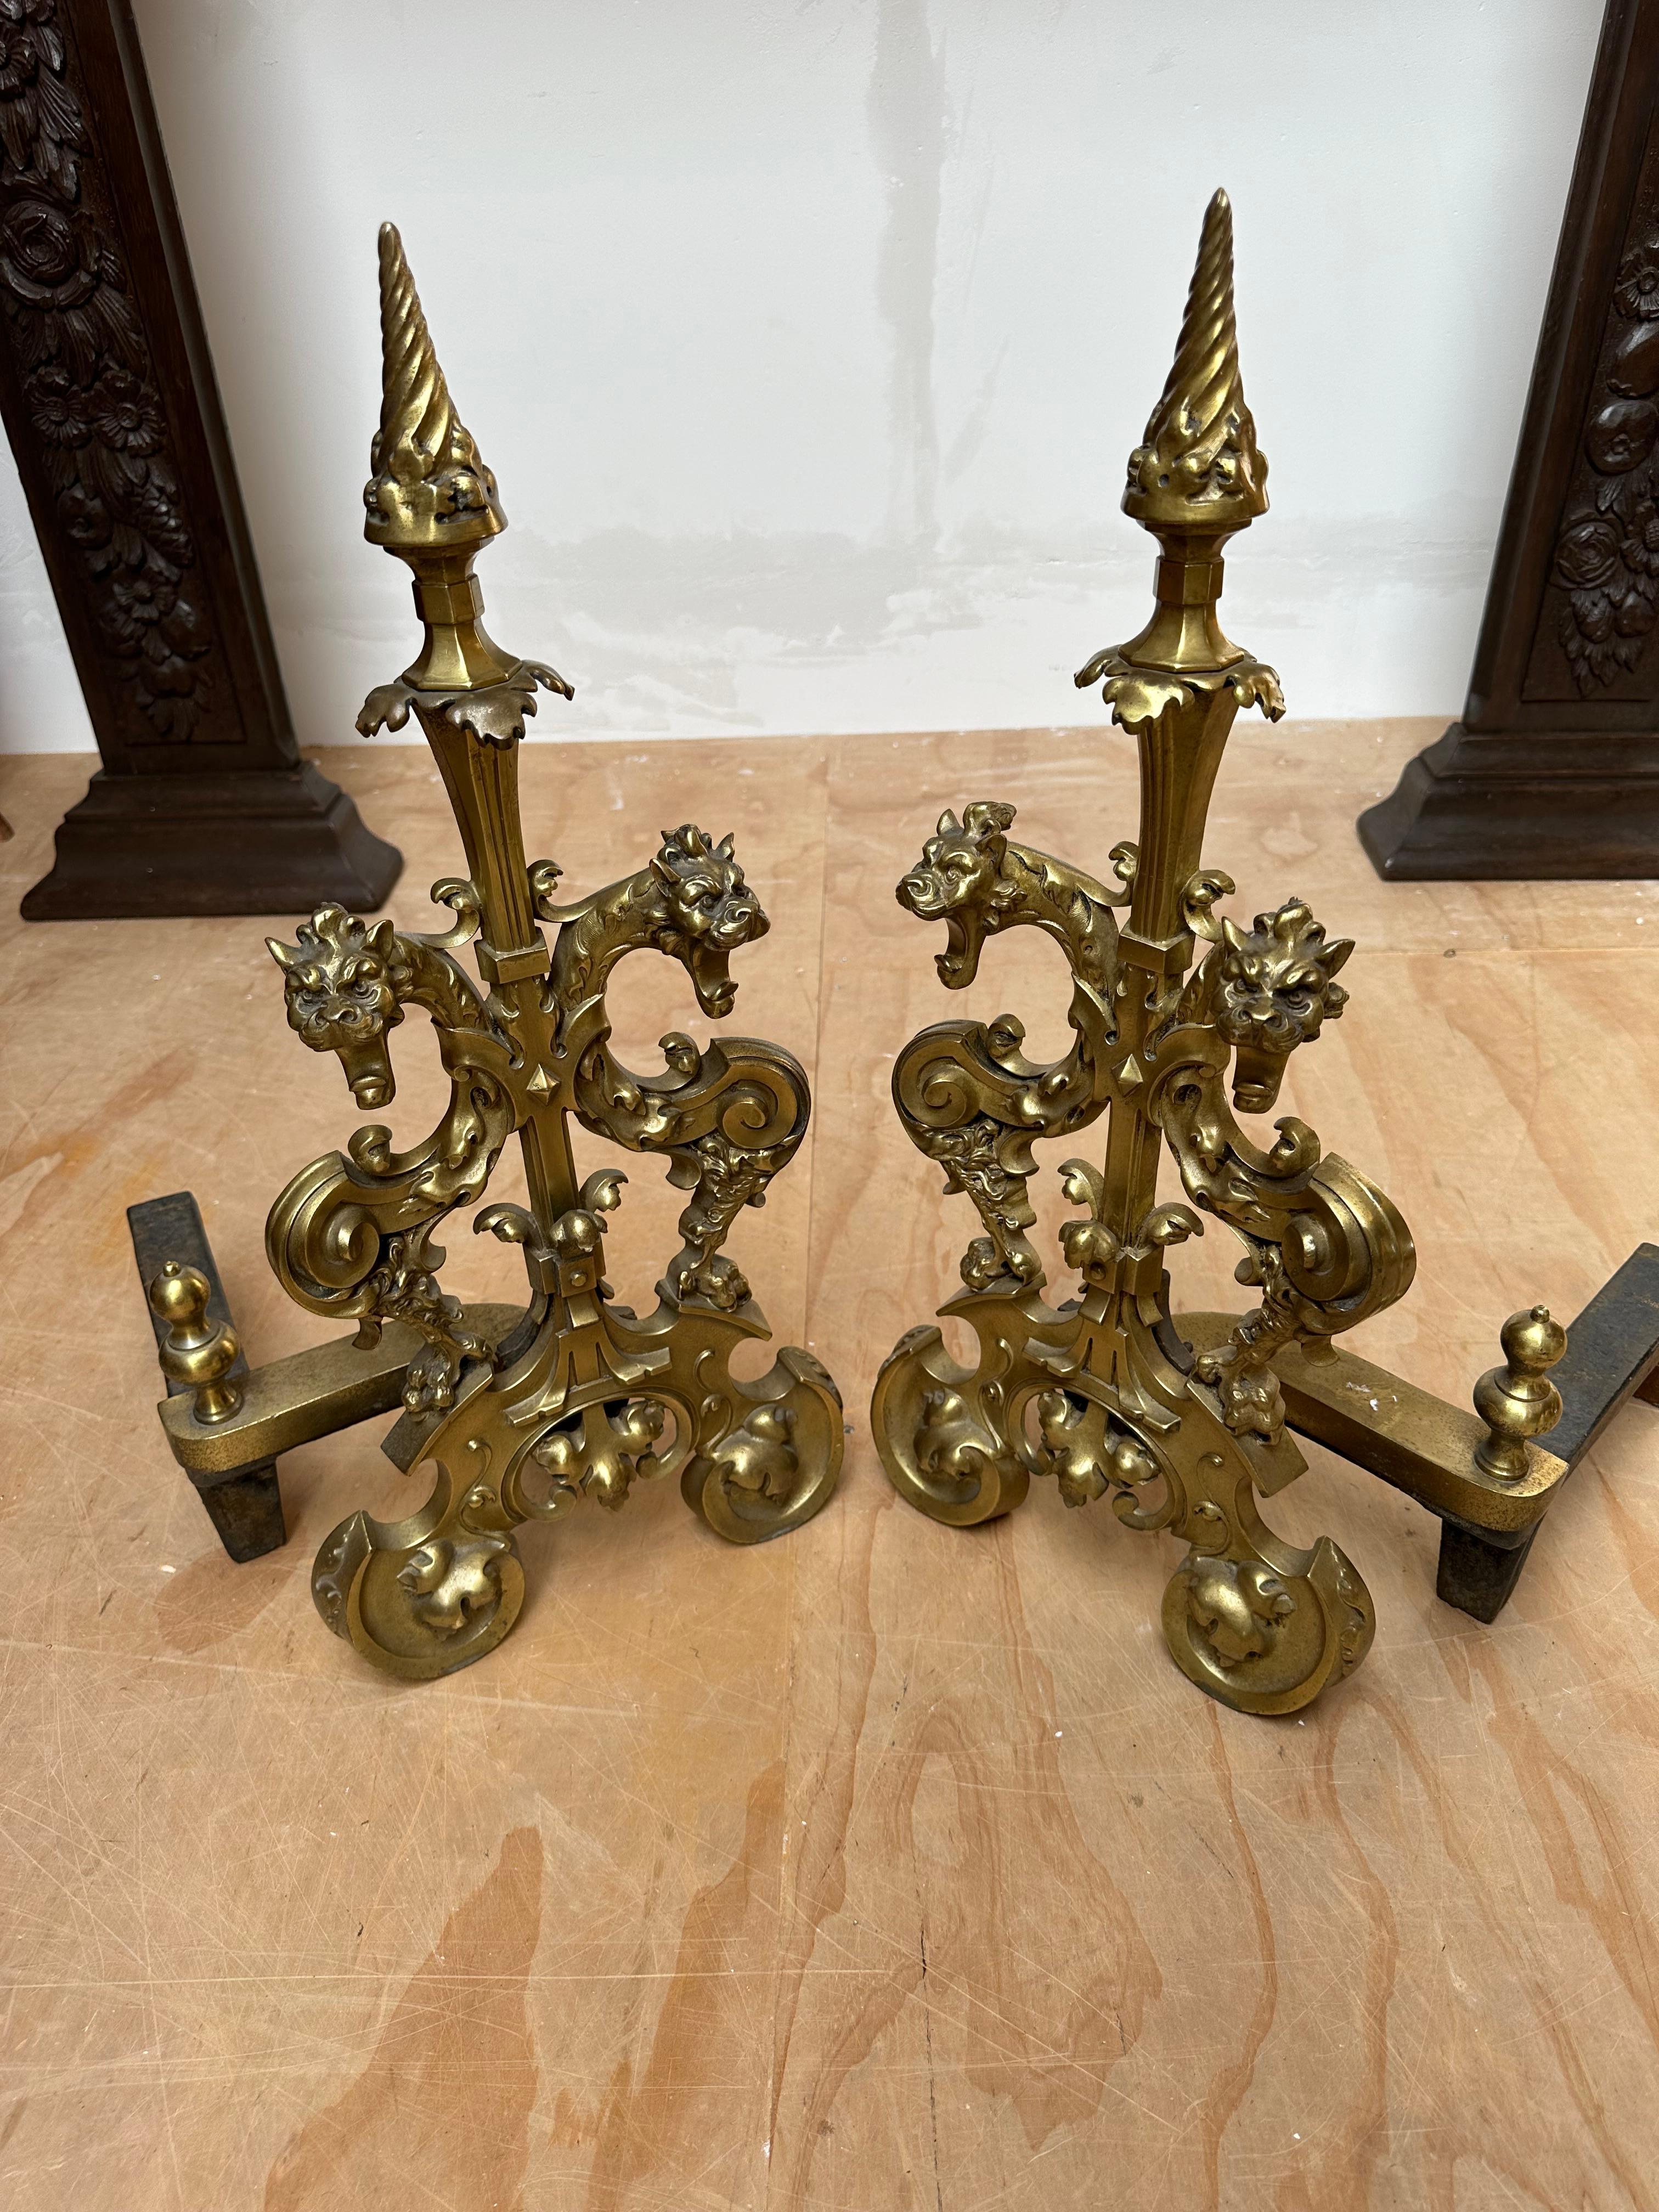 19th Century Antique Gothic Revival Gilt Bronze Dragon Andirons or Firedogs / Fireplace Tools For Sale